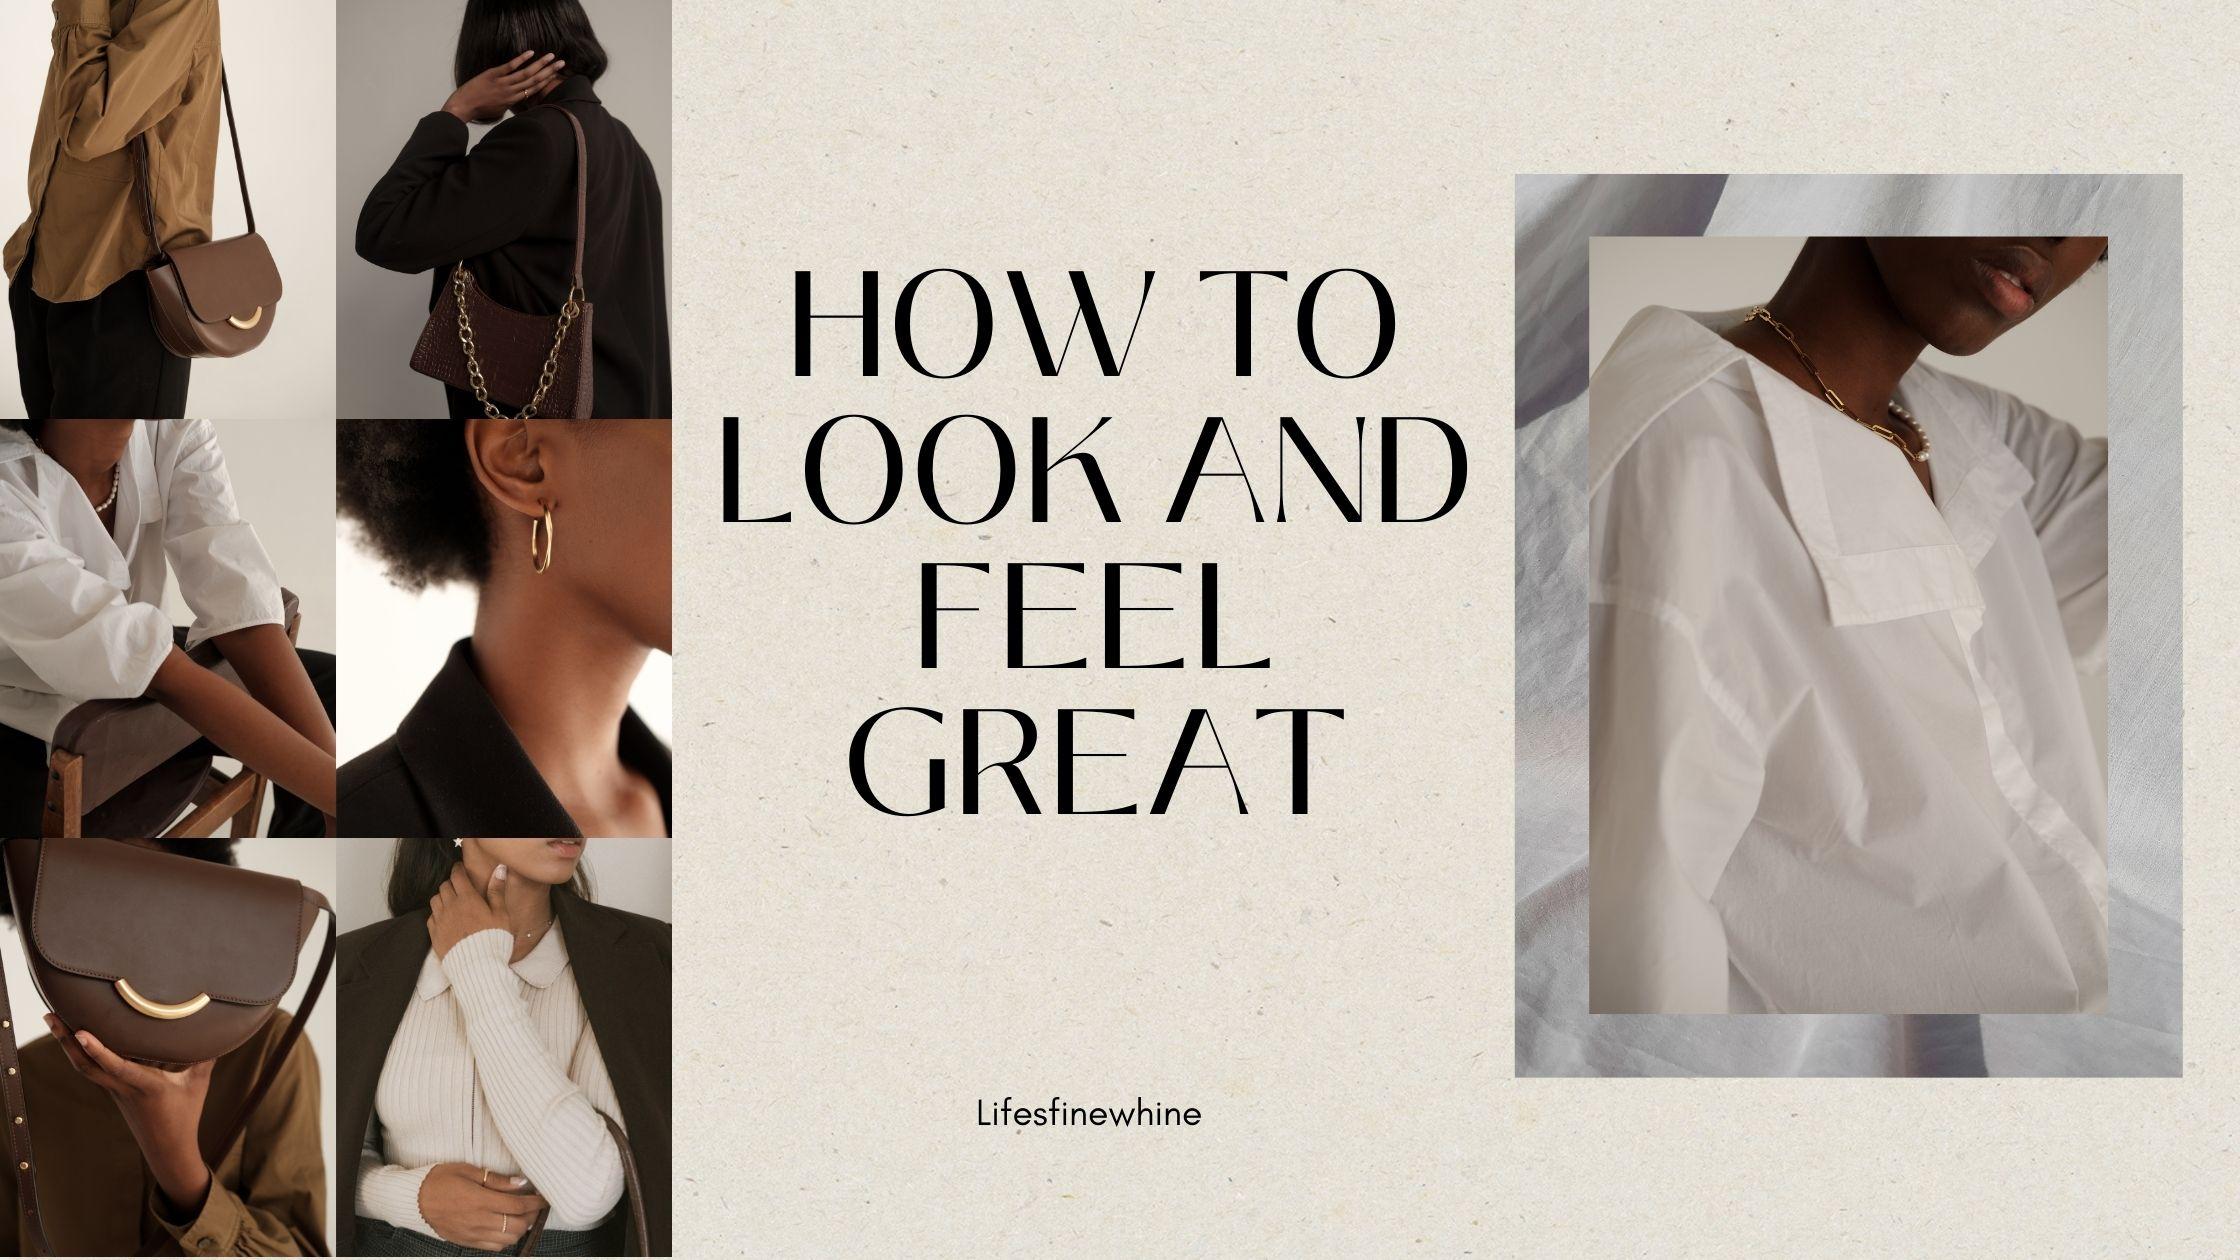 How To Look and Feel Great